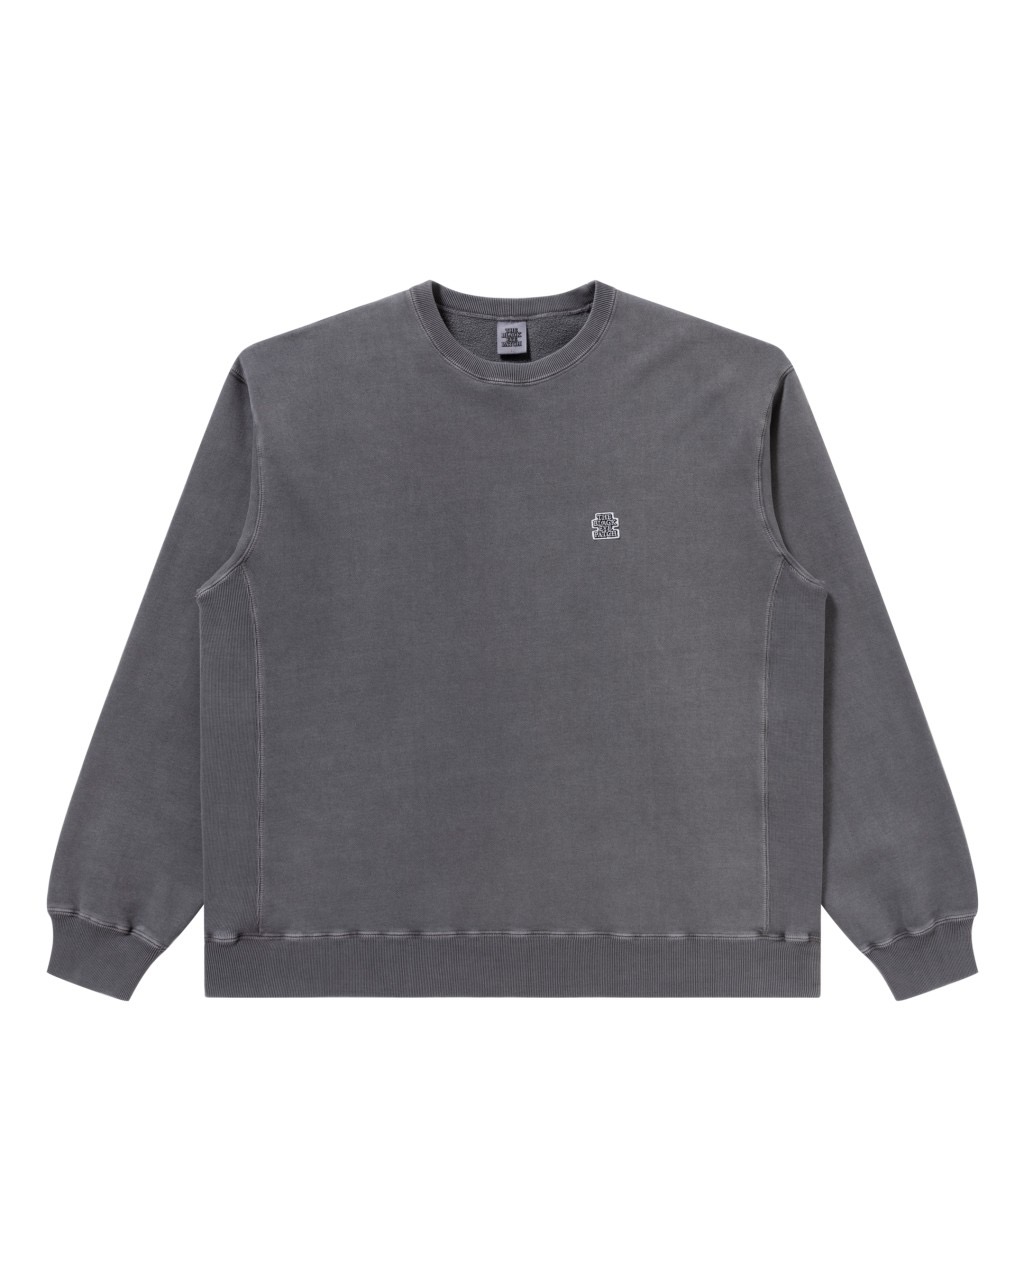 BlackEyePatch/SMALL OG LABEL PIGMENT DYED CREW SWEAT（CHARCOAL ...